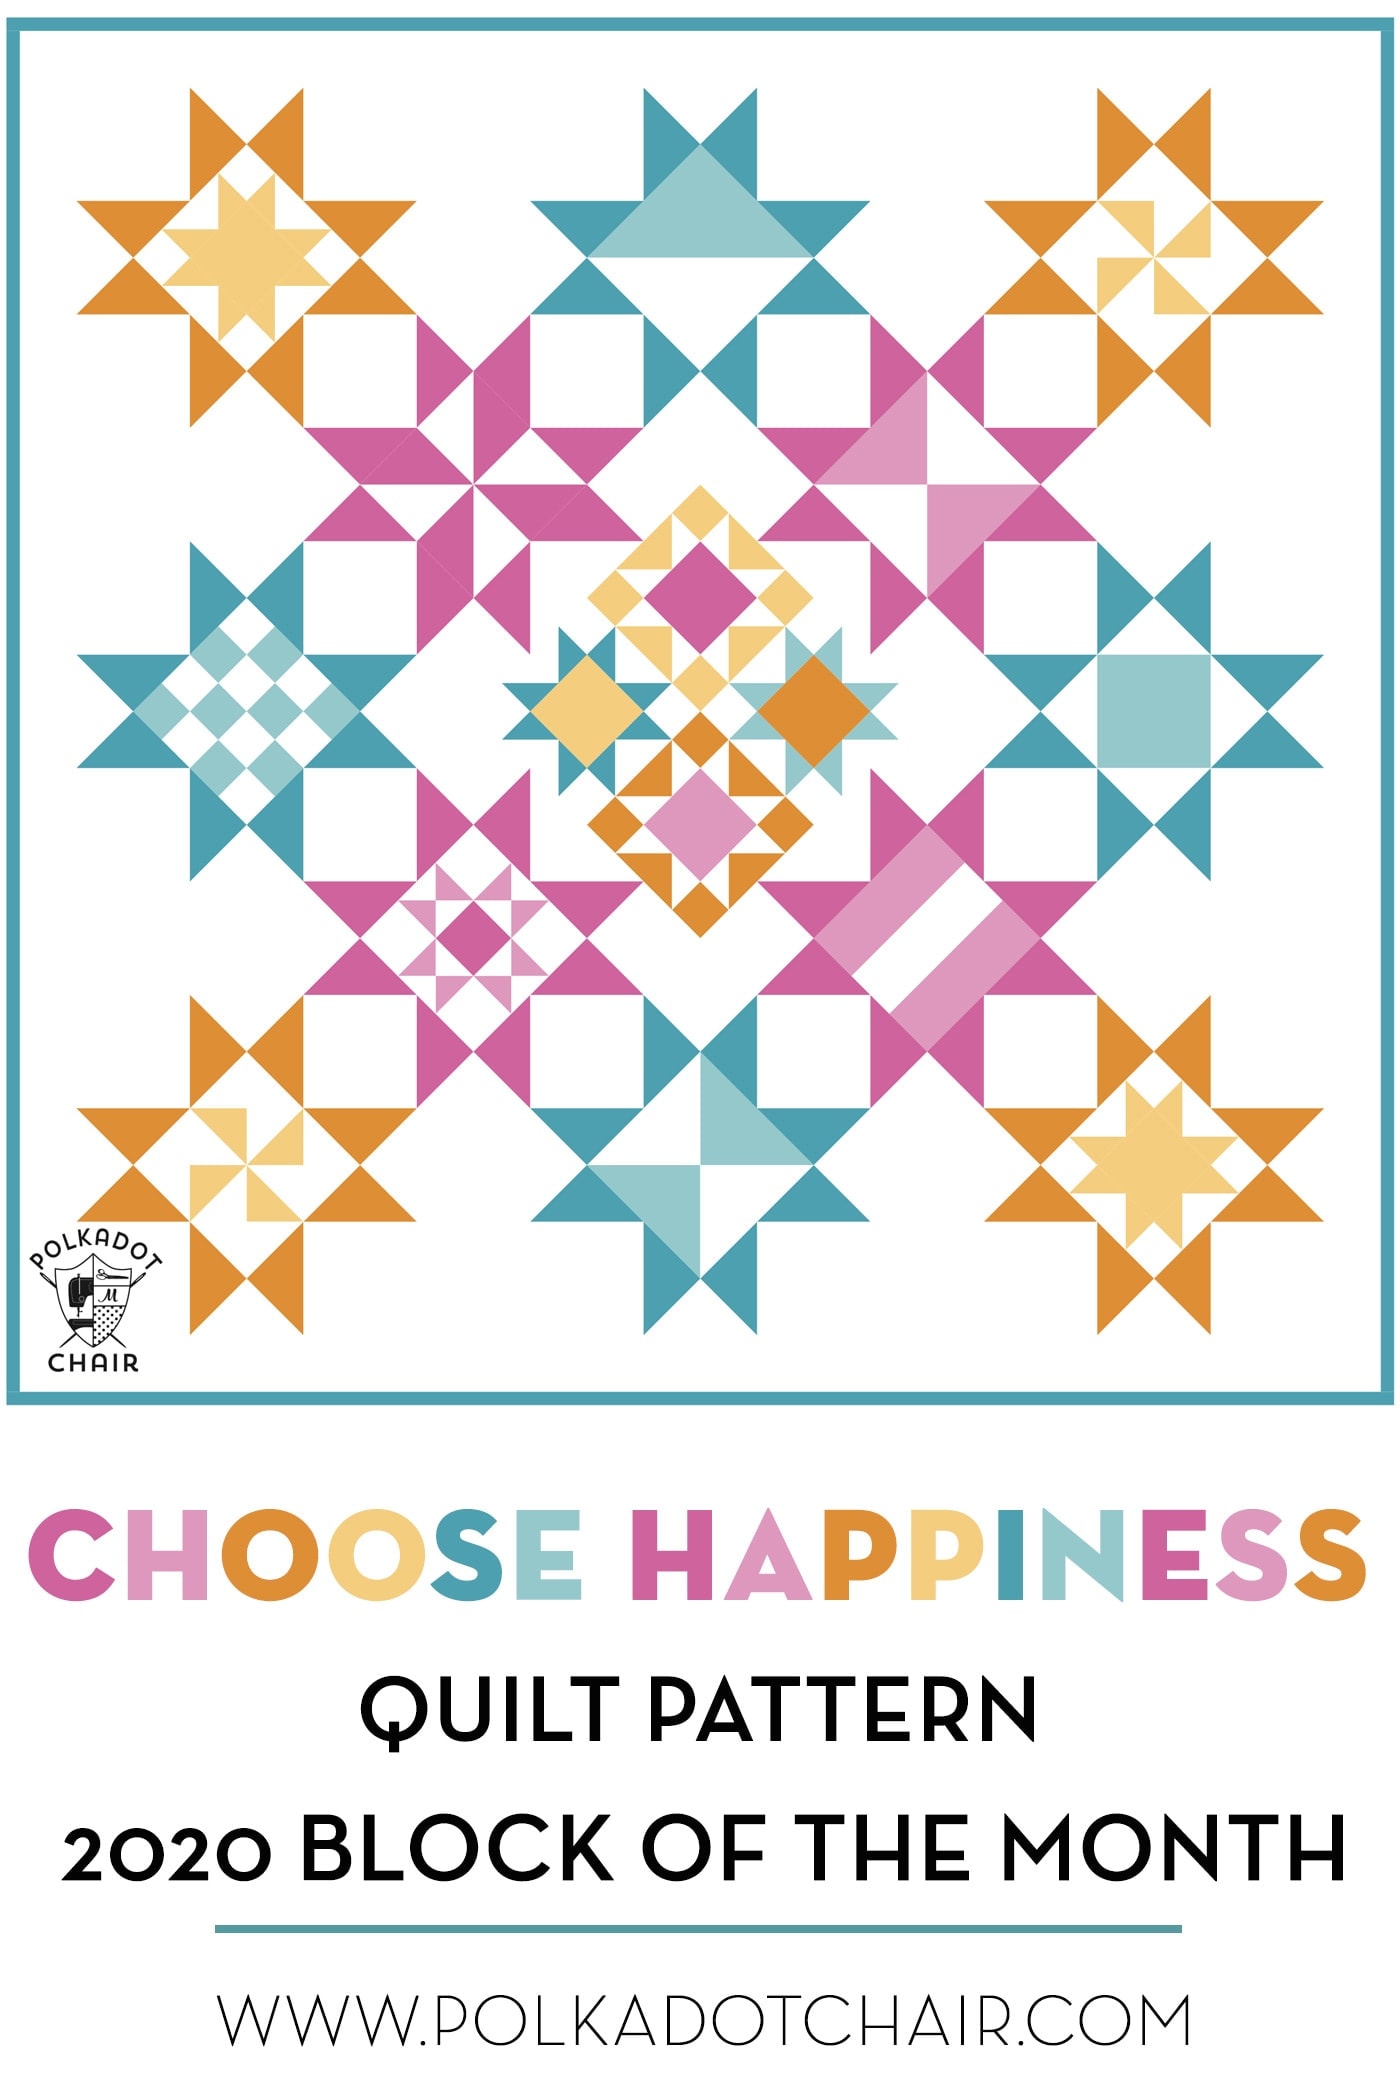 Announcing the Choose Happiness Quilt Pattern; 2020 Block of the Month